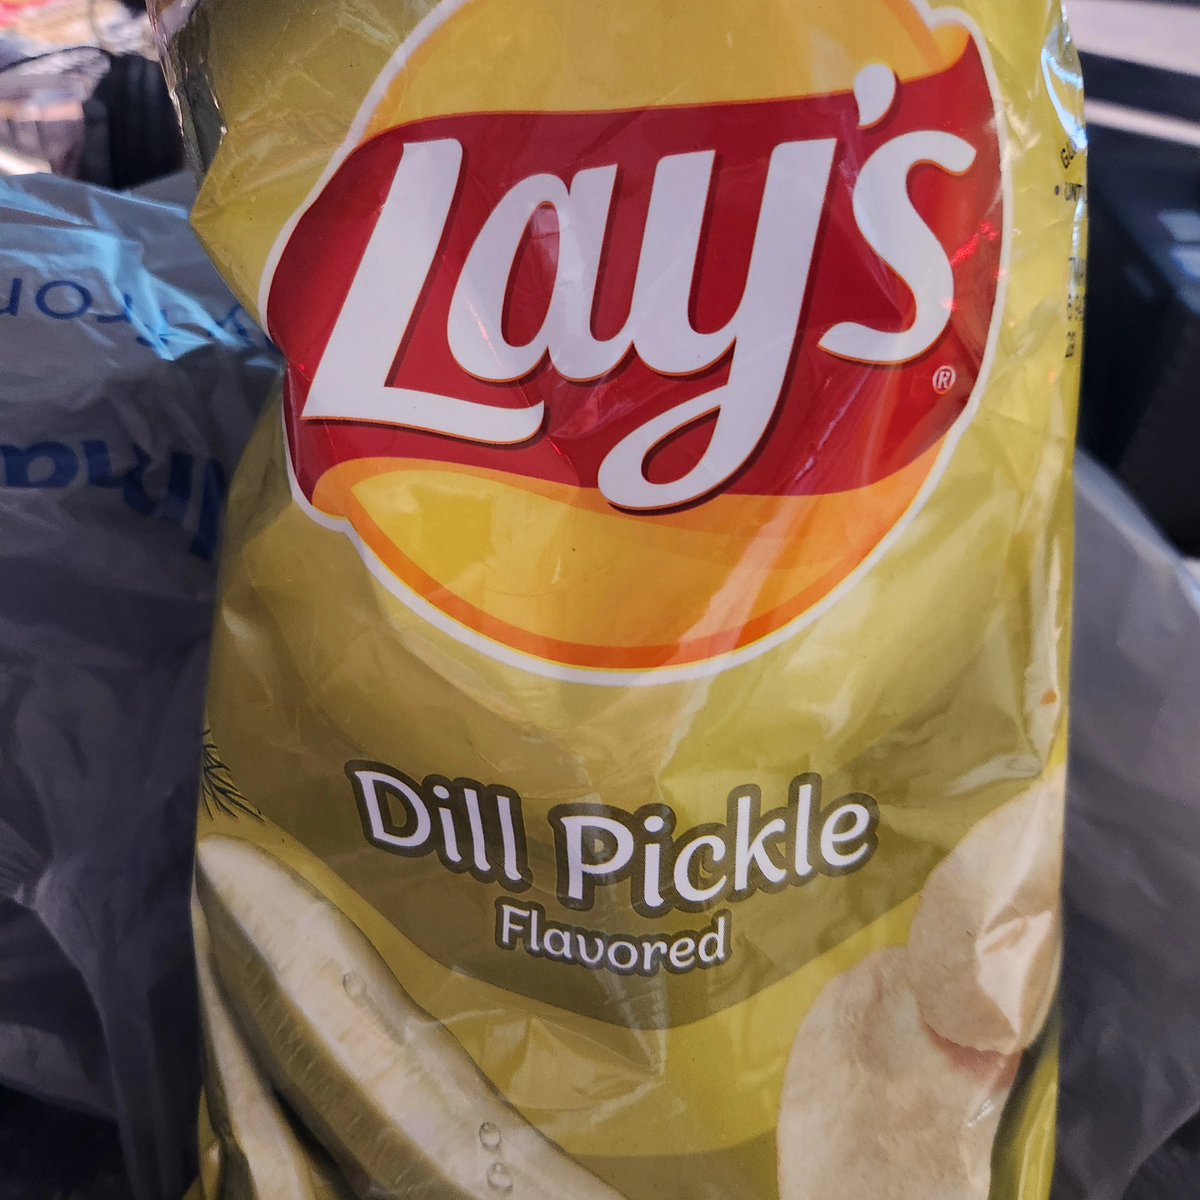 Today's #tastetesttuesday was one we've been looking for and finally found it at the Walmart on Cortaro.  The Lay's Dill Pickle Flavored Potato Chip.  We all loved them!!  So good.  Lay's nailed the dill pickle flavor.